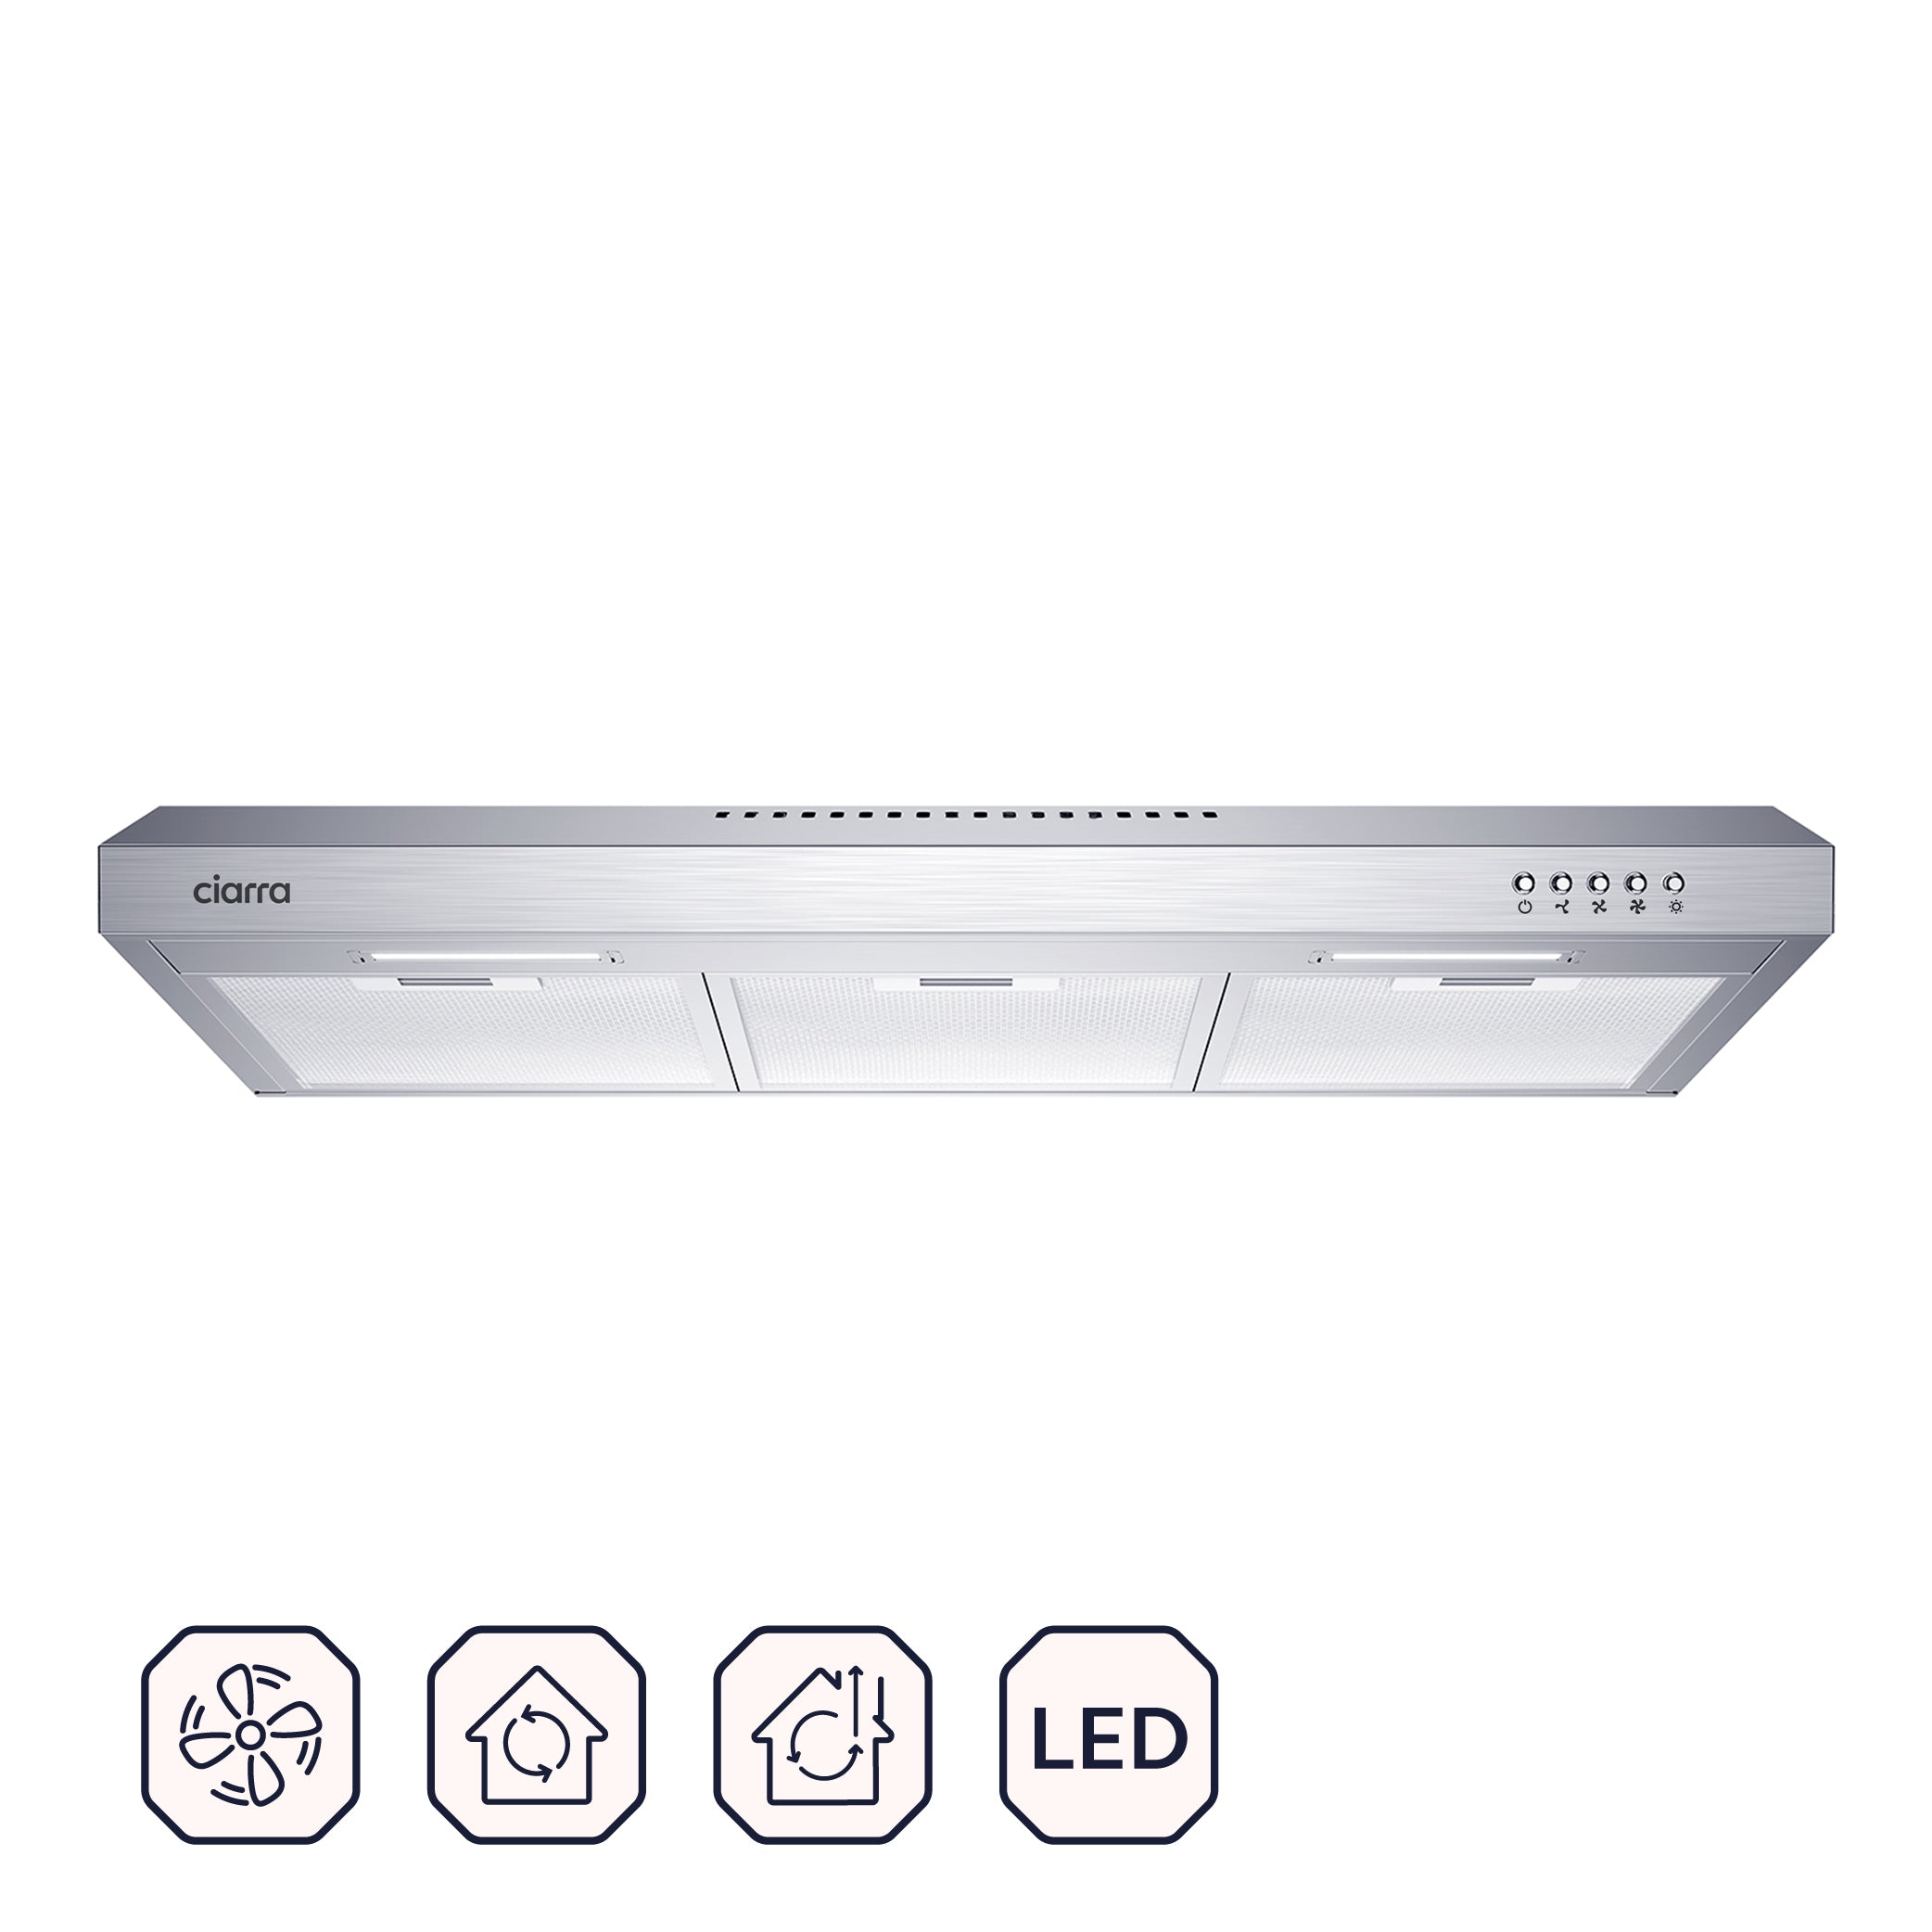 CIARRA CAS75918BN cIARRA Ductless Range Hood 30 inch Under cabinet Slim  Hood Vent for Kitchen Ducted and Ductless convertible cAS75918BN